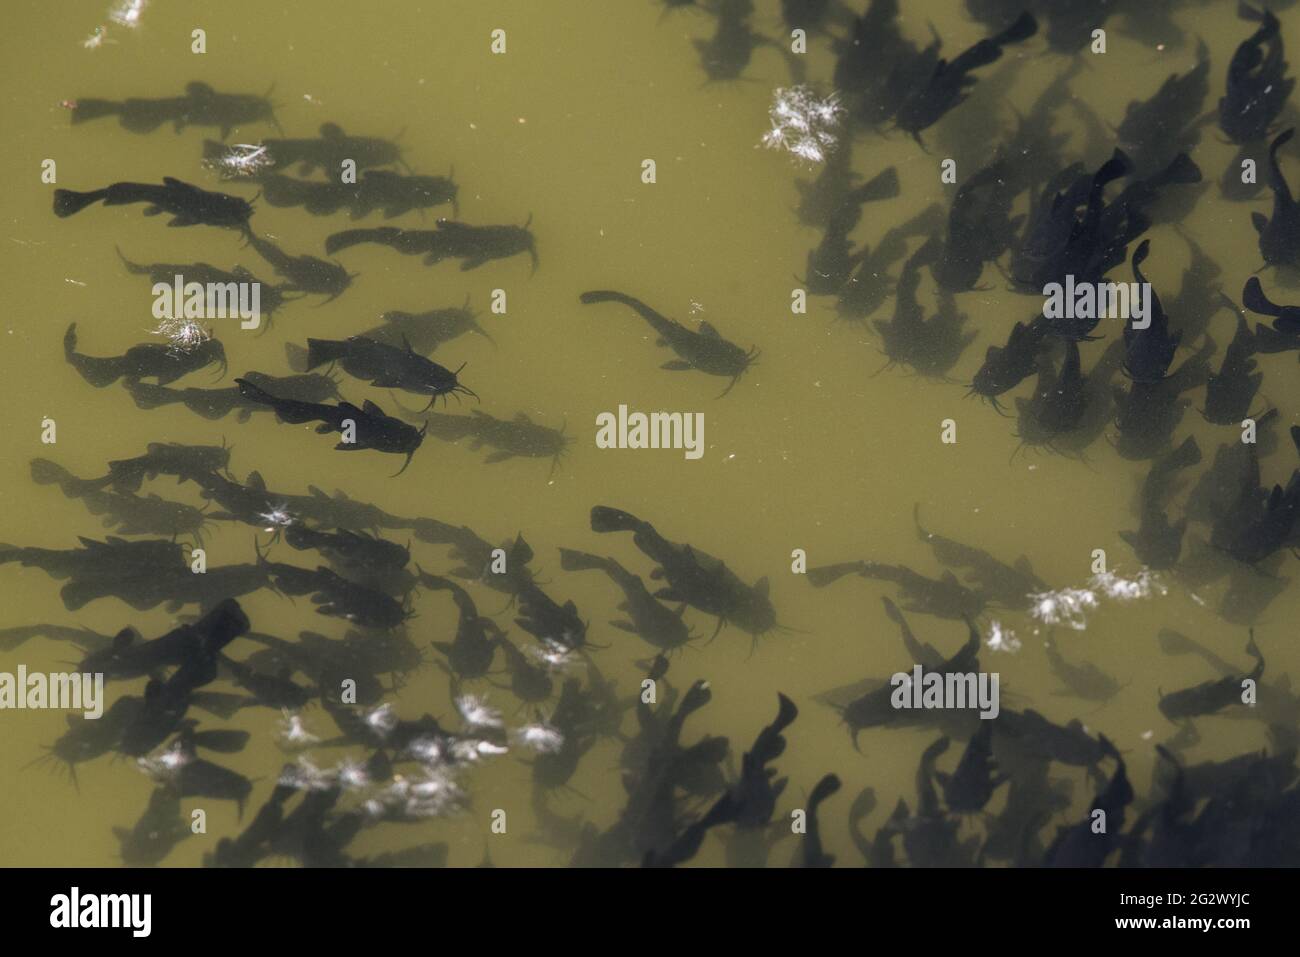 Young newly hatched black bullhead catfish (Ameiurus melas) schooling together in California, they are an invasive fish species non native to the area. Stock Photo